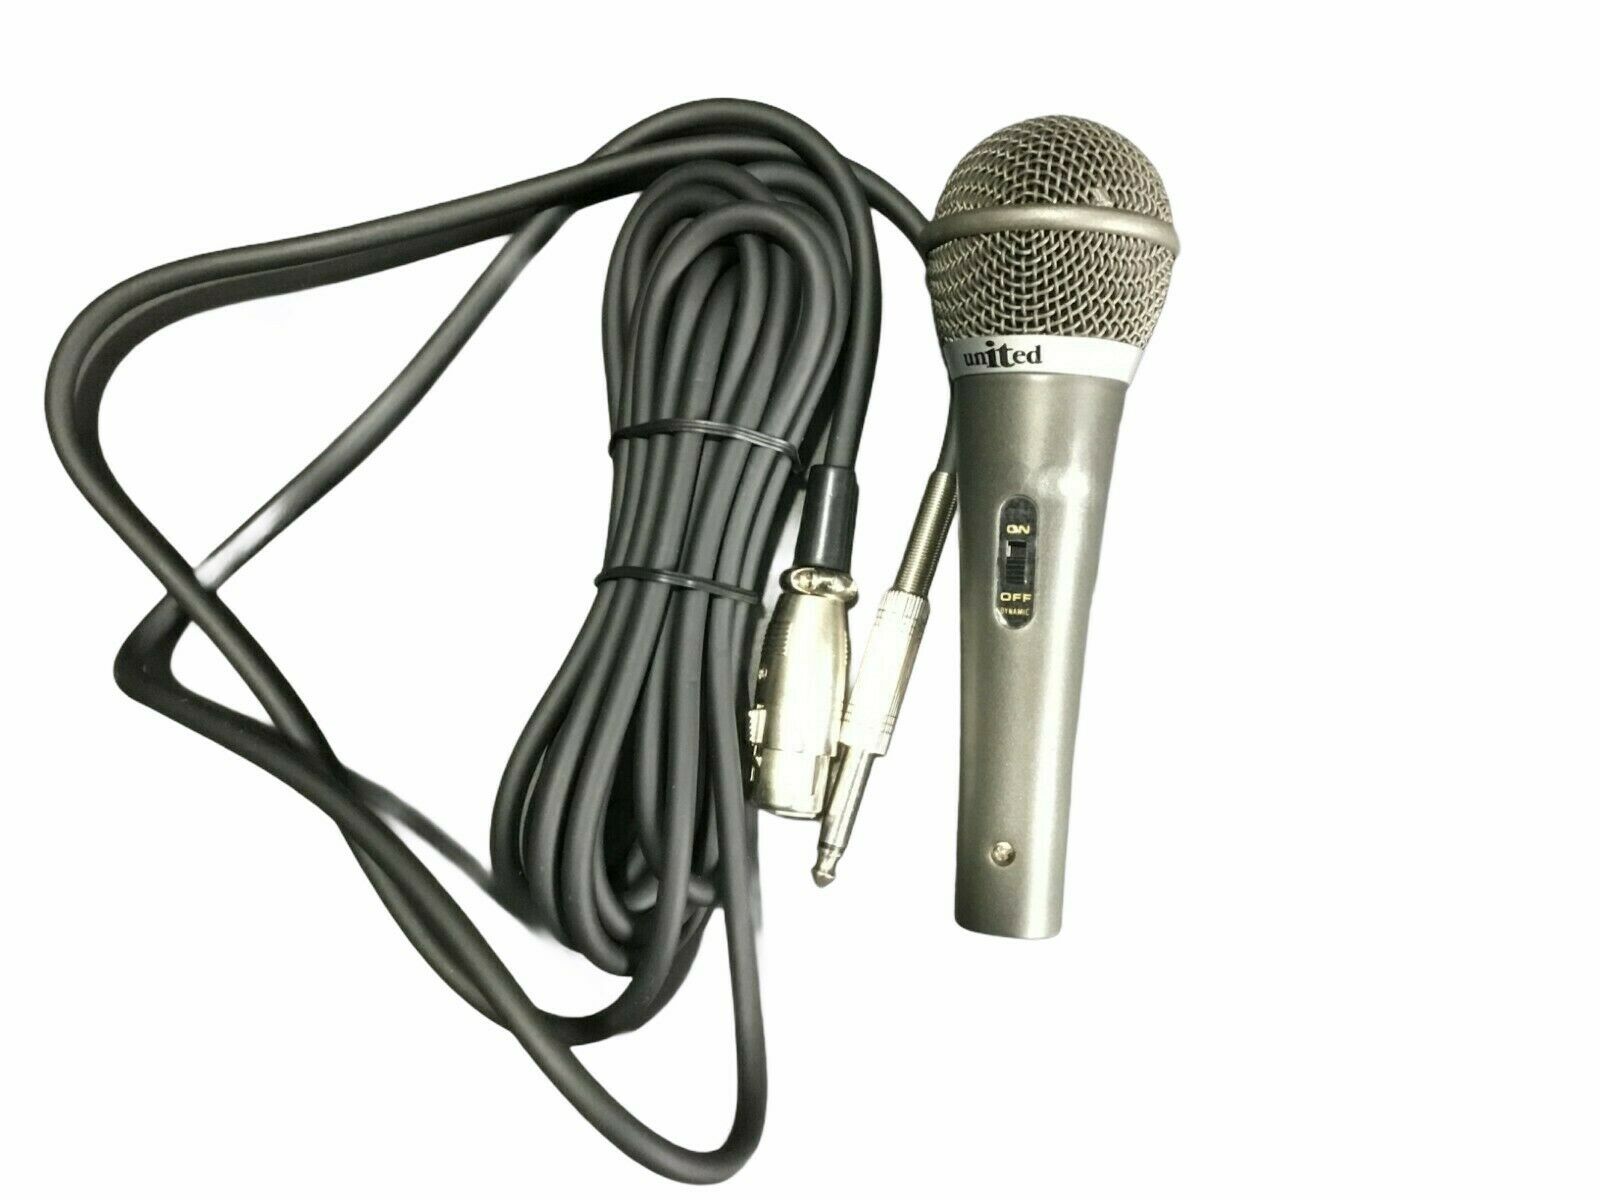 United UM 800 Professional Karaoke Microphone With Microphone Cable